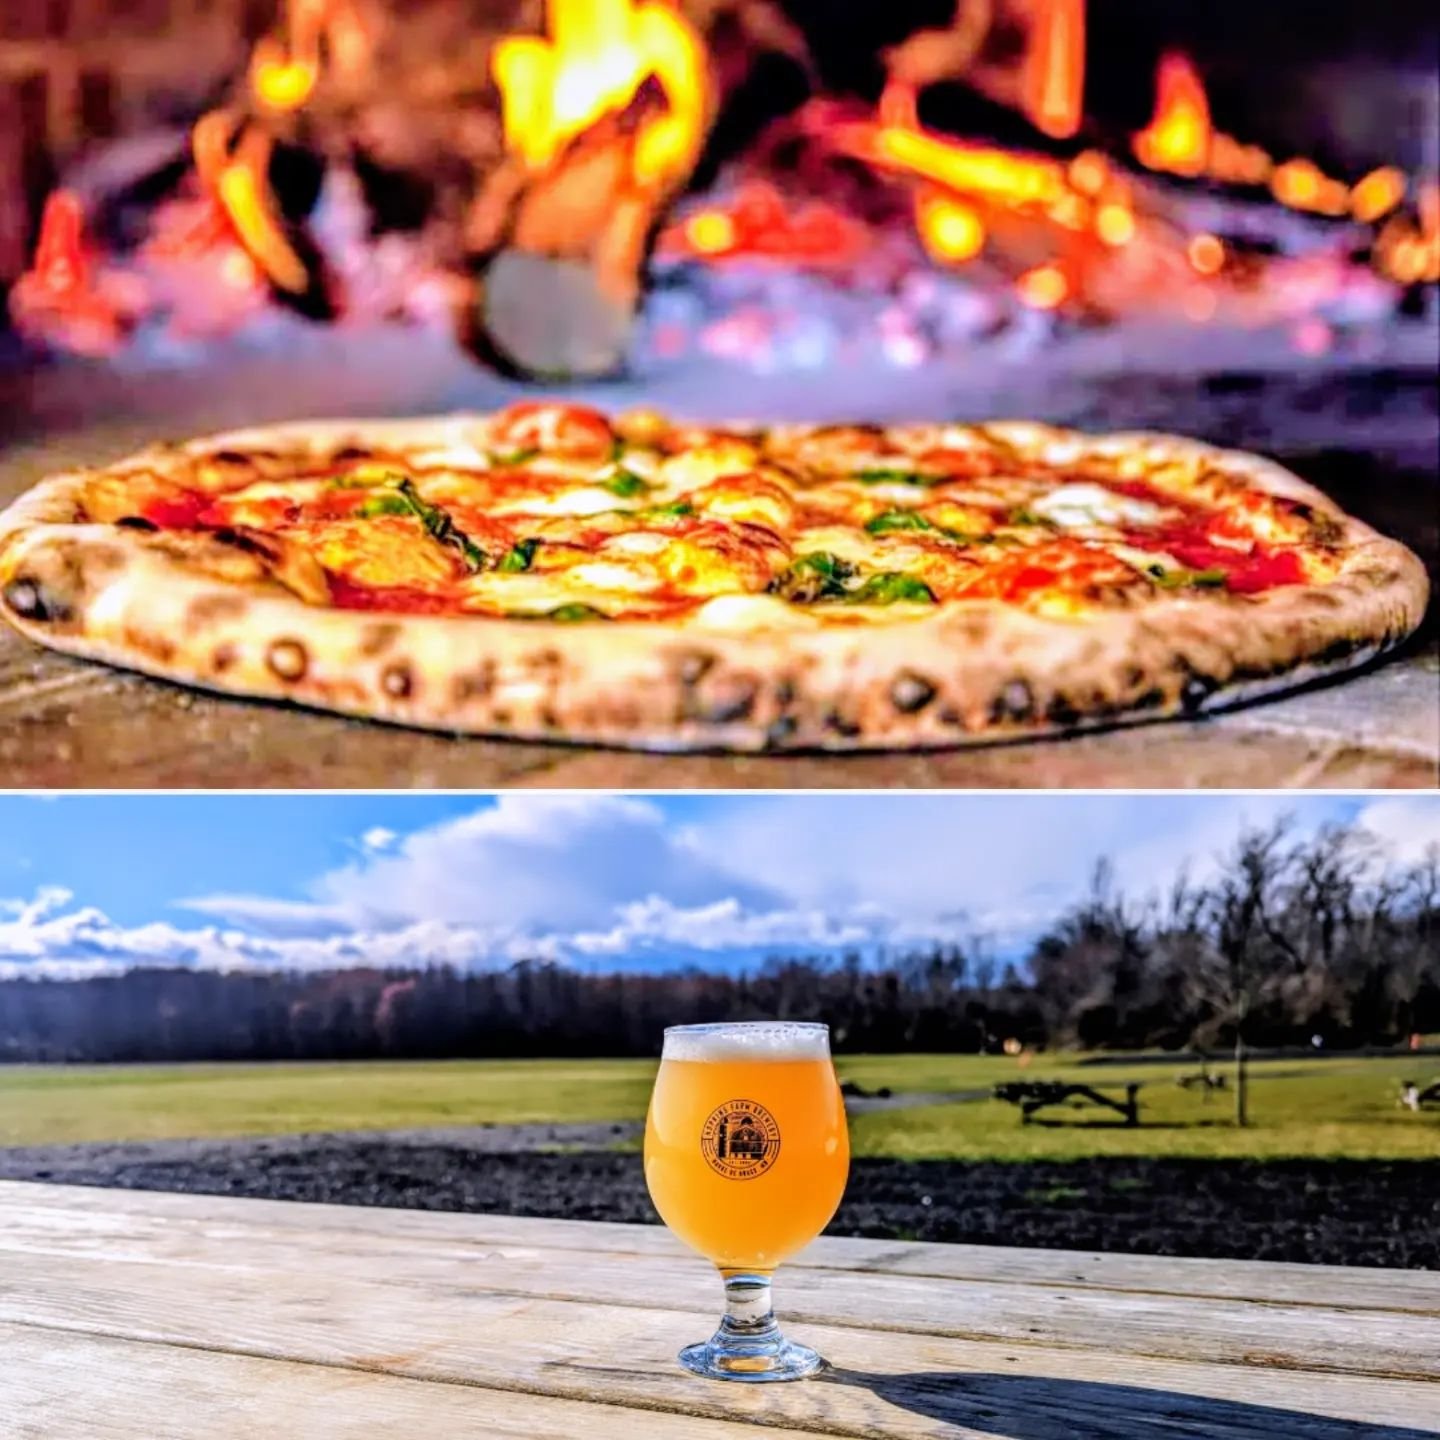 Cold beer + hot pizza = perfect combo for a Thursday!

@thepitshack will be here at 4PM and Downtime Networking starts at 5PM!